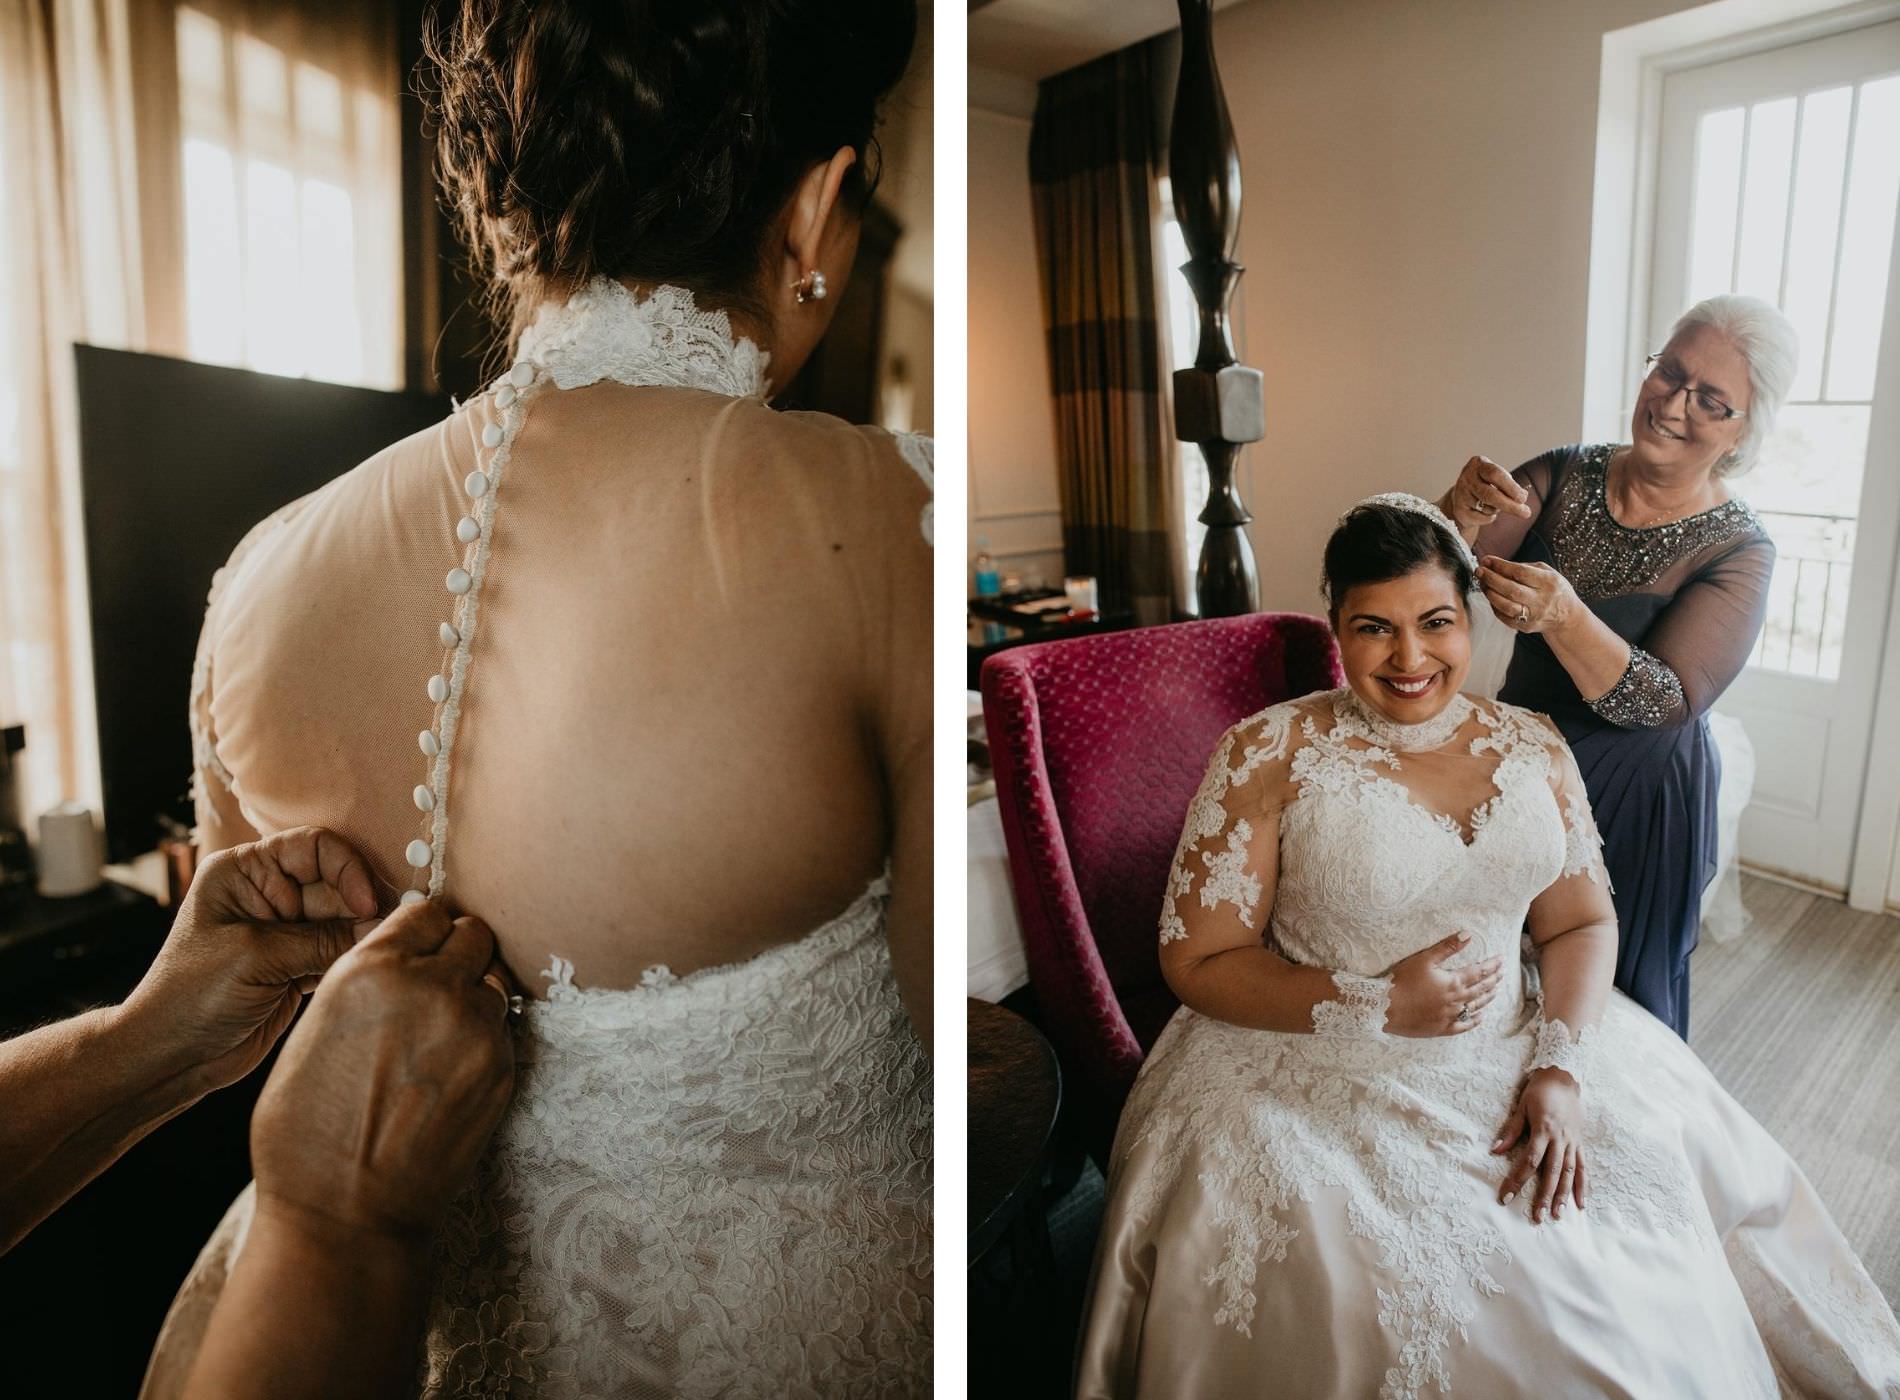 Mother of the Bride Helping Bride Get Dressed and Ready | Champagne and Ivory Lace Allure Bridal Ball Gown with Sweetheart Neckline and Illusion Lace Bodice and Sleeves with Buttons